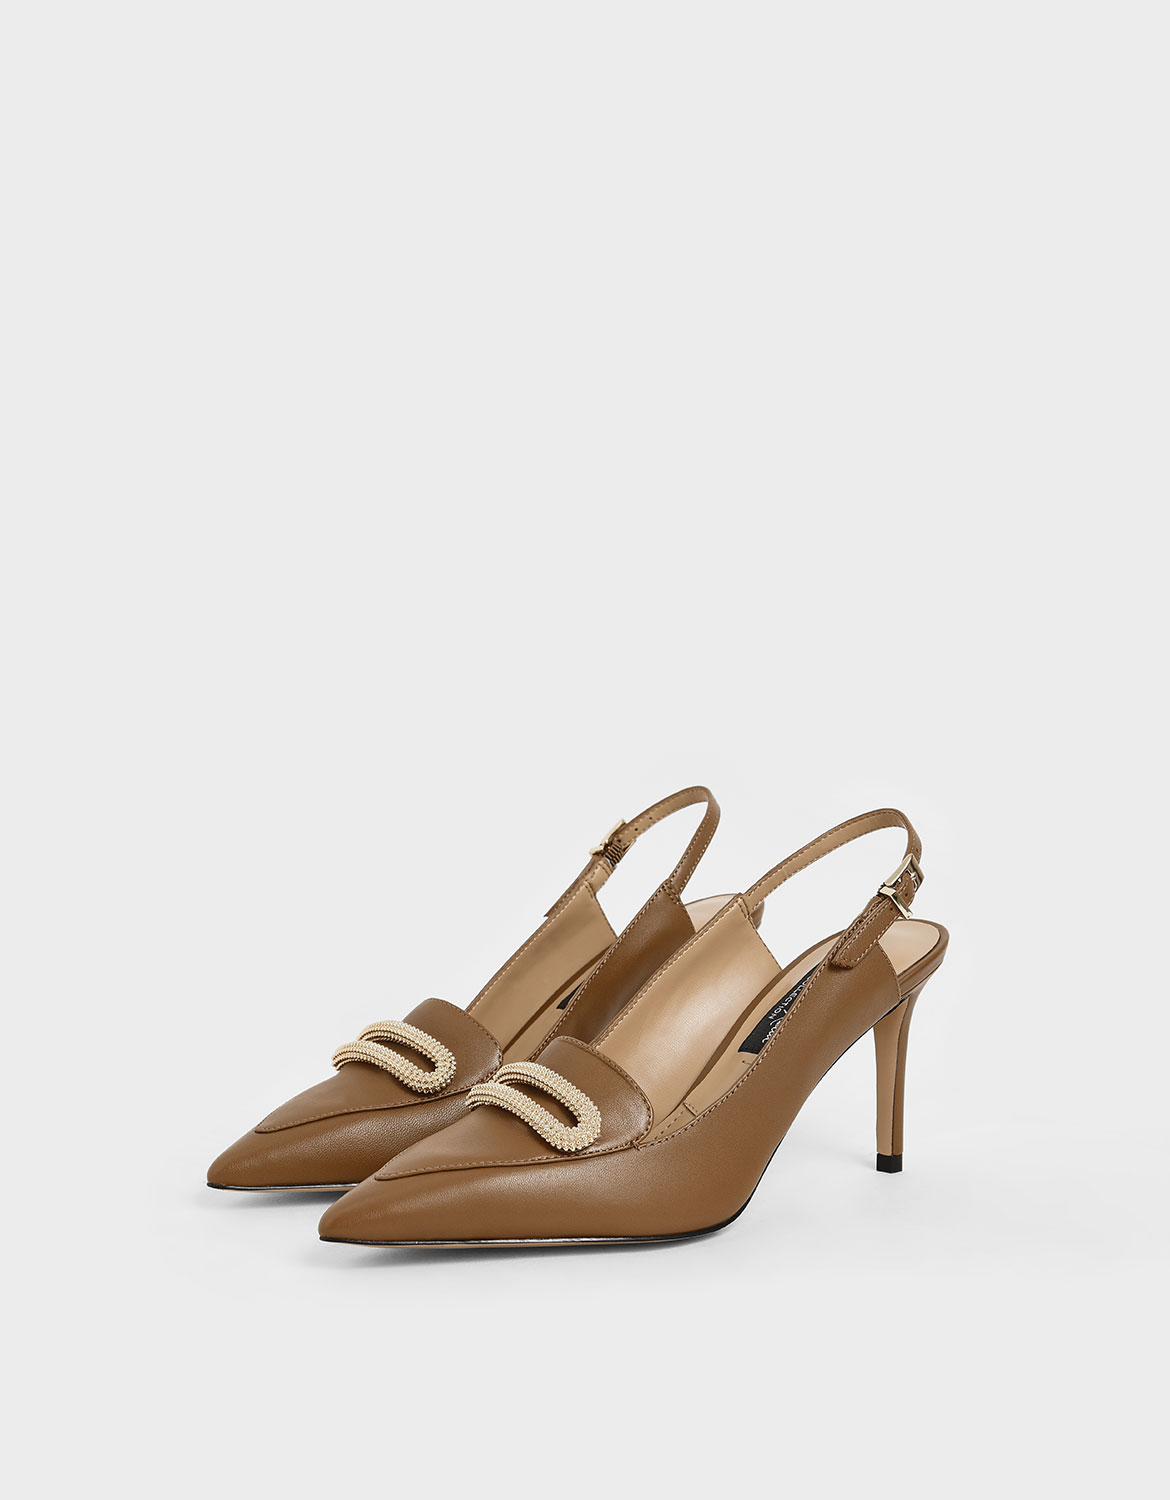 Women’s brown leather metallic accent pumps